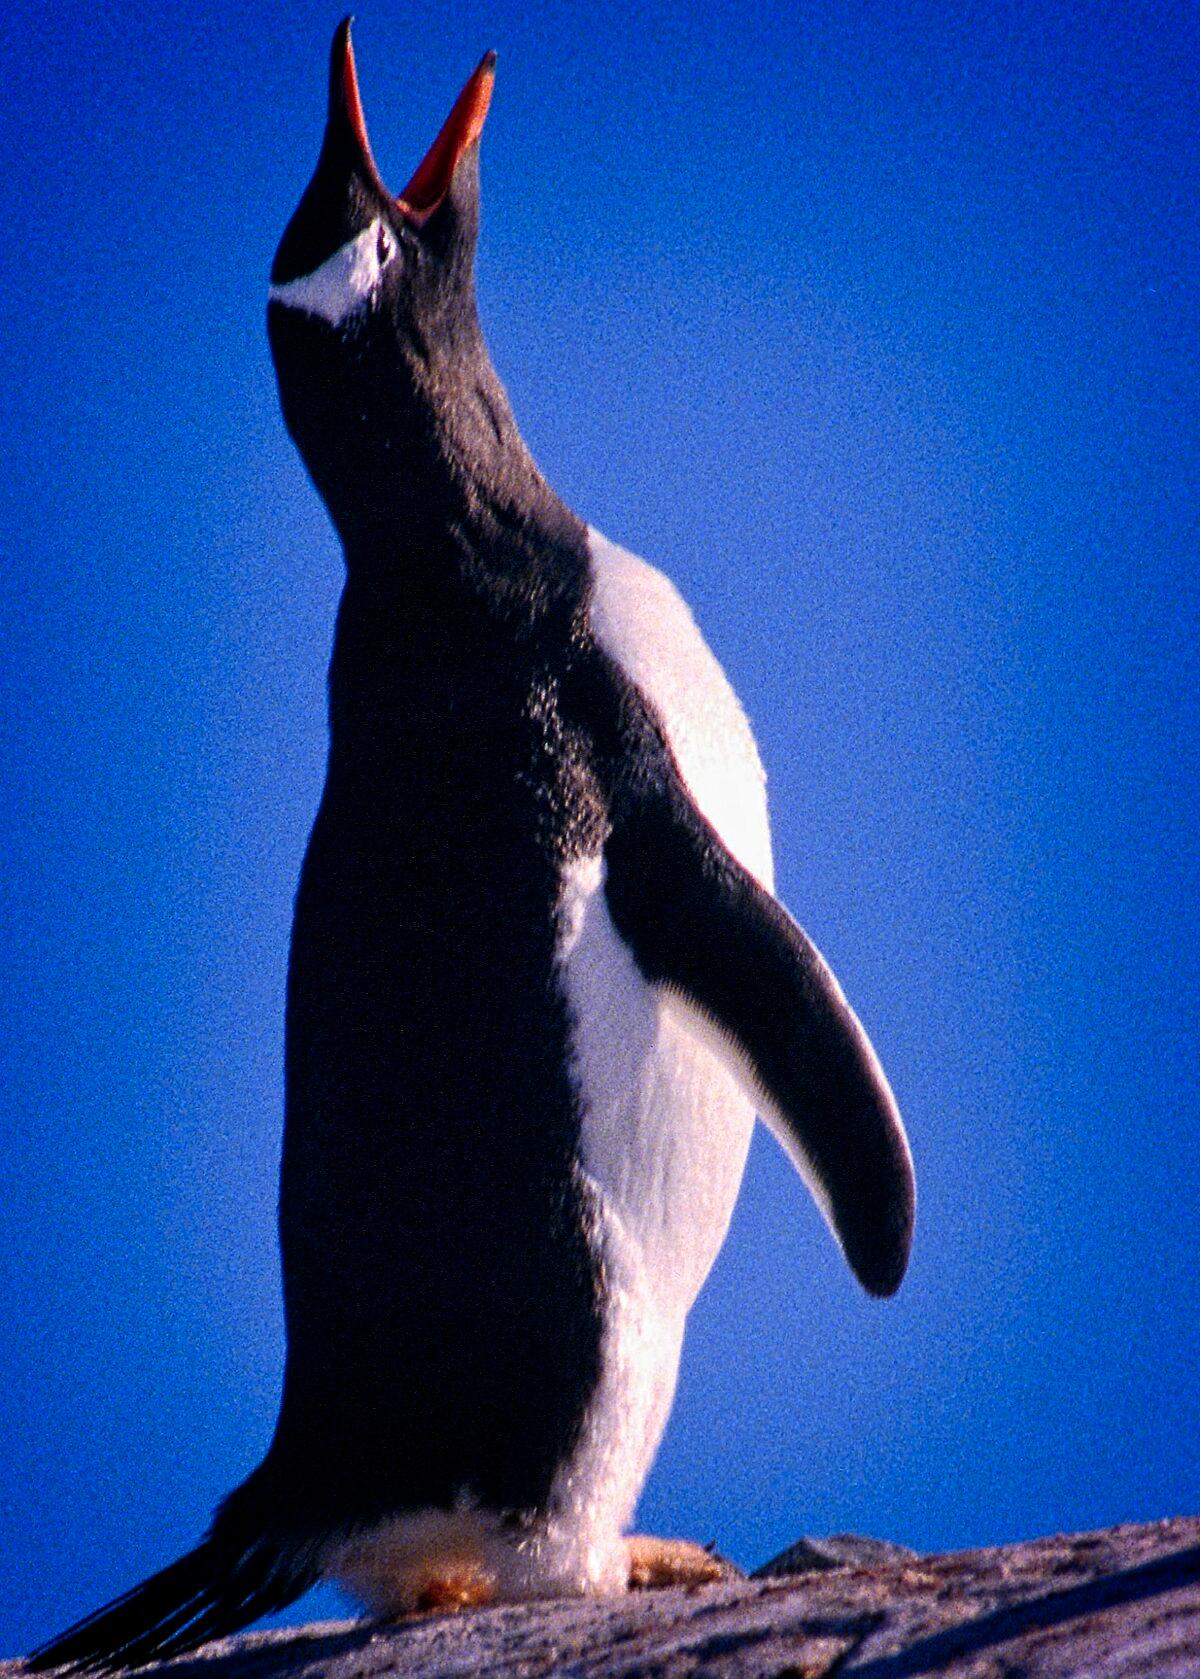 To attract a female, a male penguin will pump his chest, angle his flippers, stretch his head skyward, and let out a loud braying sound. (Copyright Fred J. Eckert)